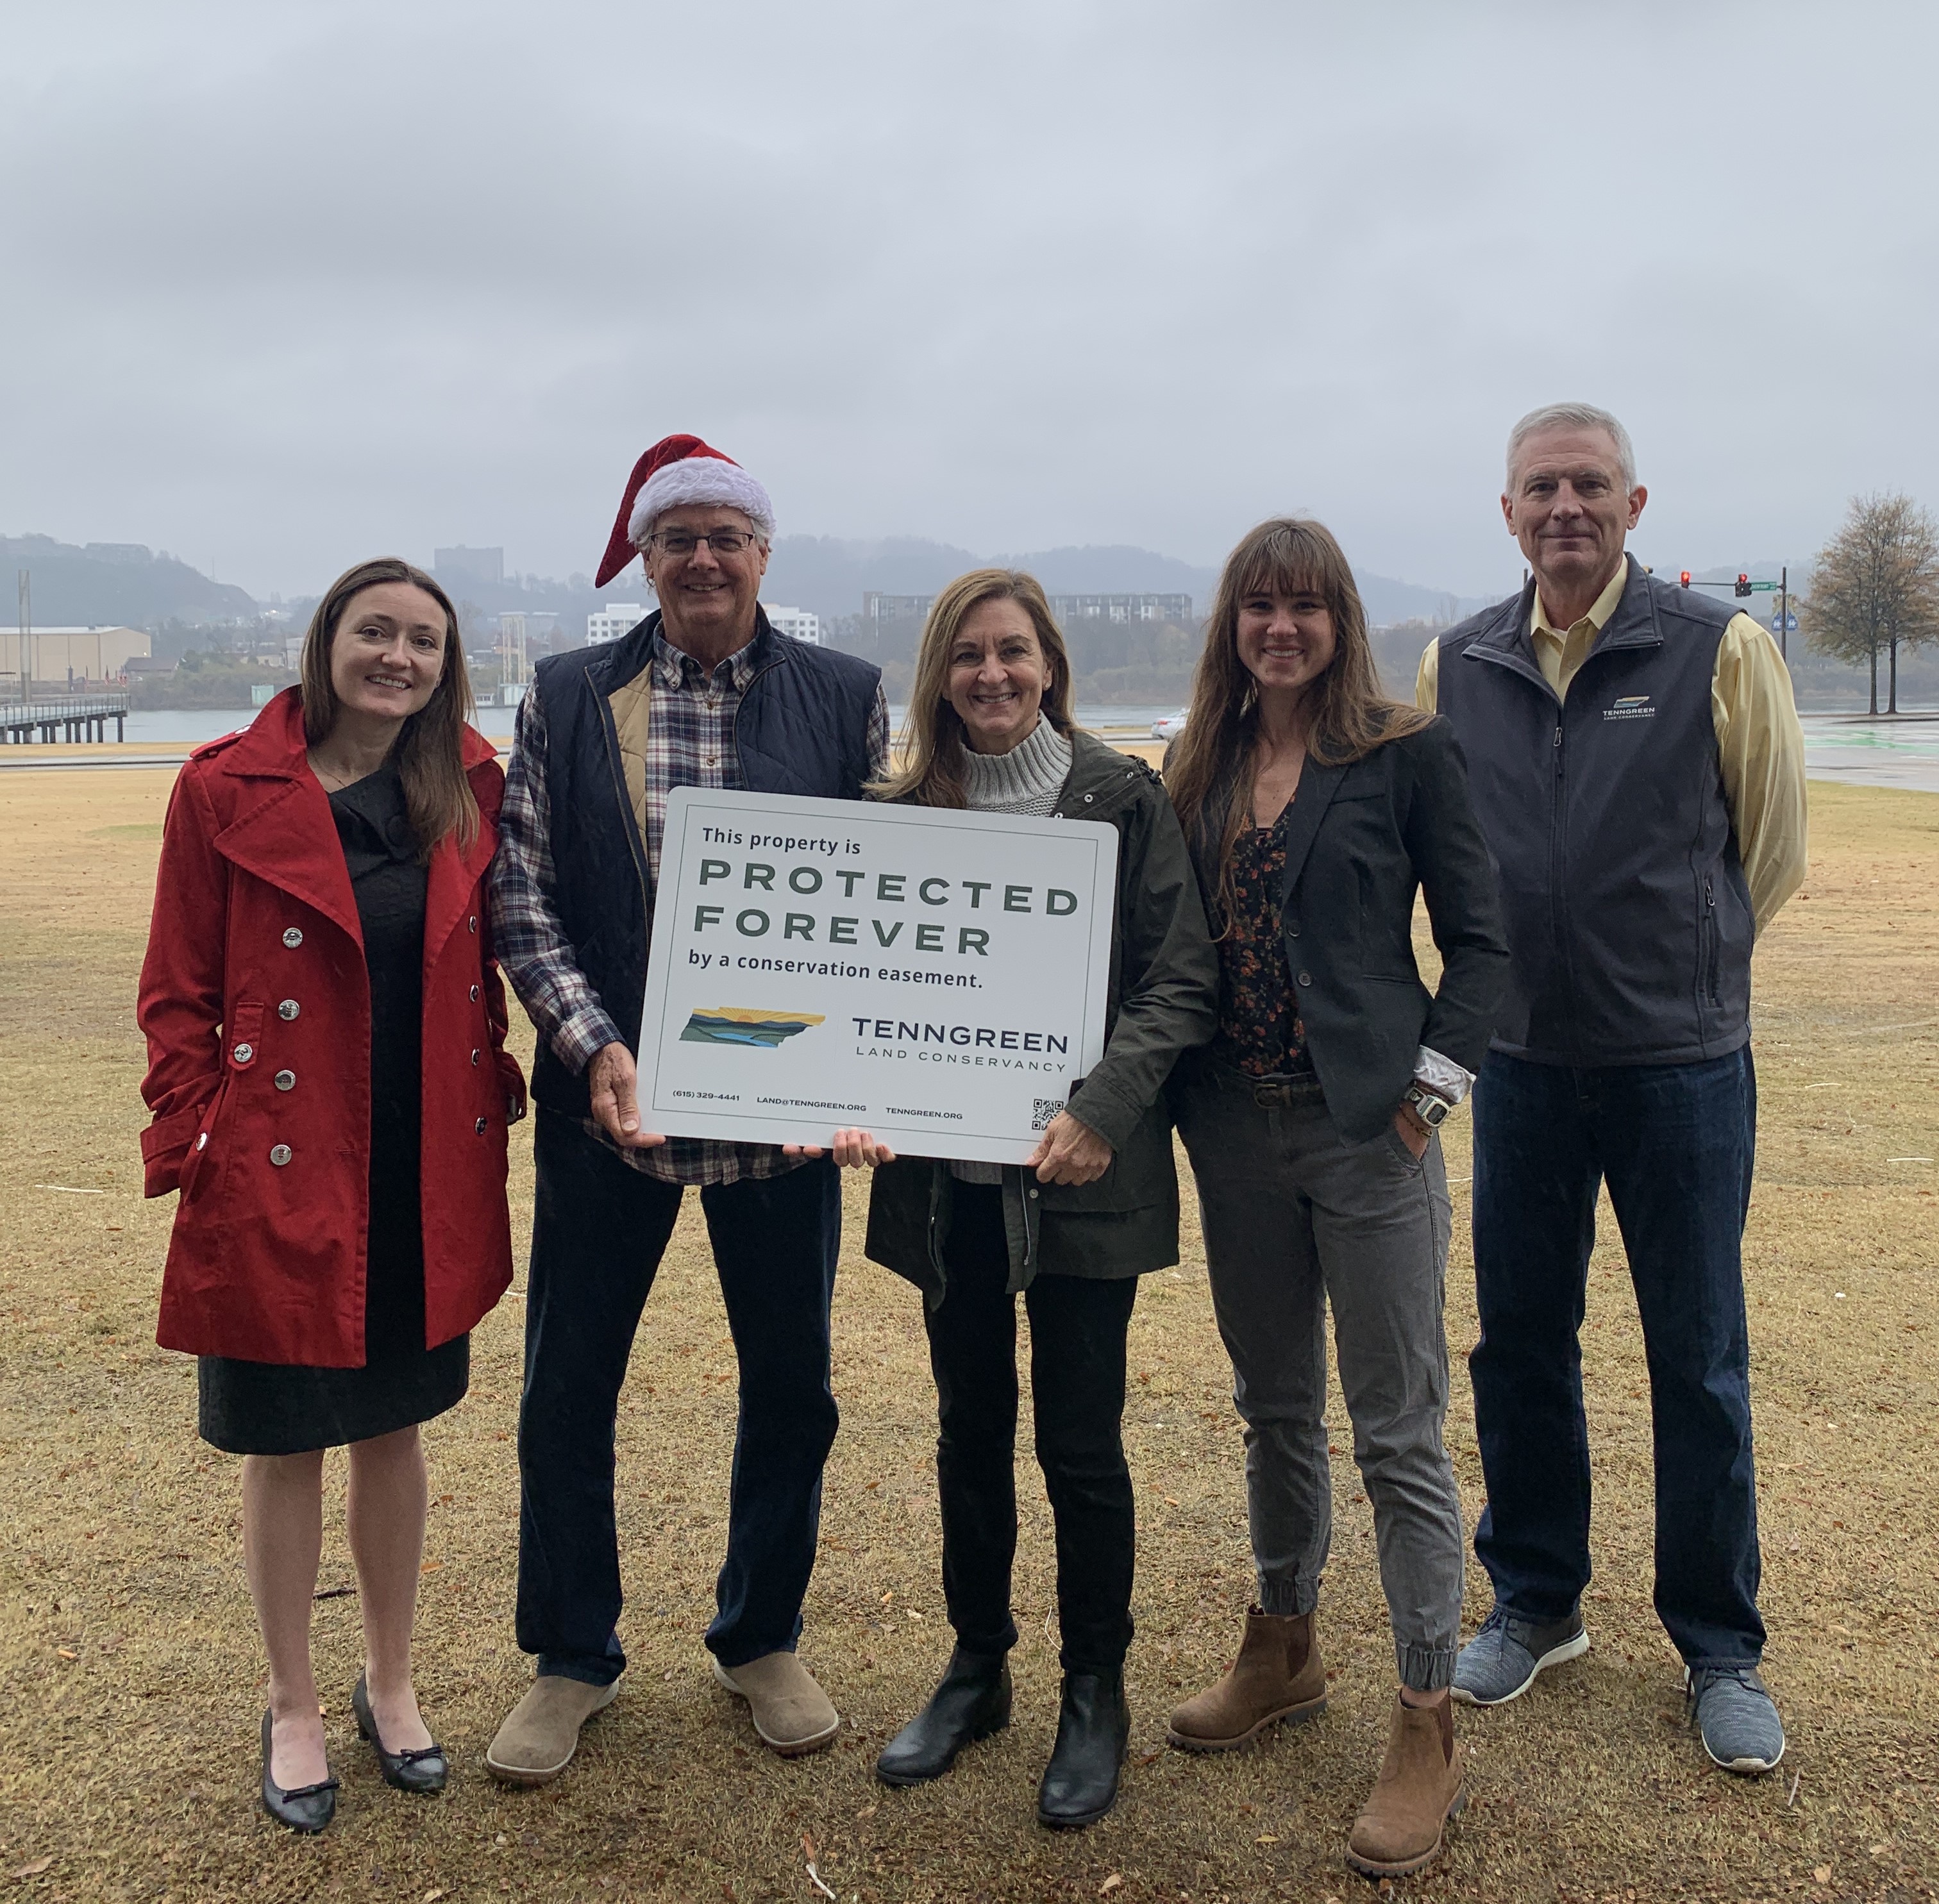 From Left: Executive Director Alice Hudson Pell, Landowners Van & Corinne Bunch, Conservation Project Manager Kristen Hanratty, and Board President Mark Peacock at signing of Laurel Trace